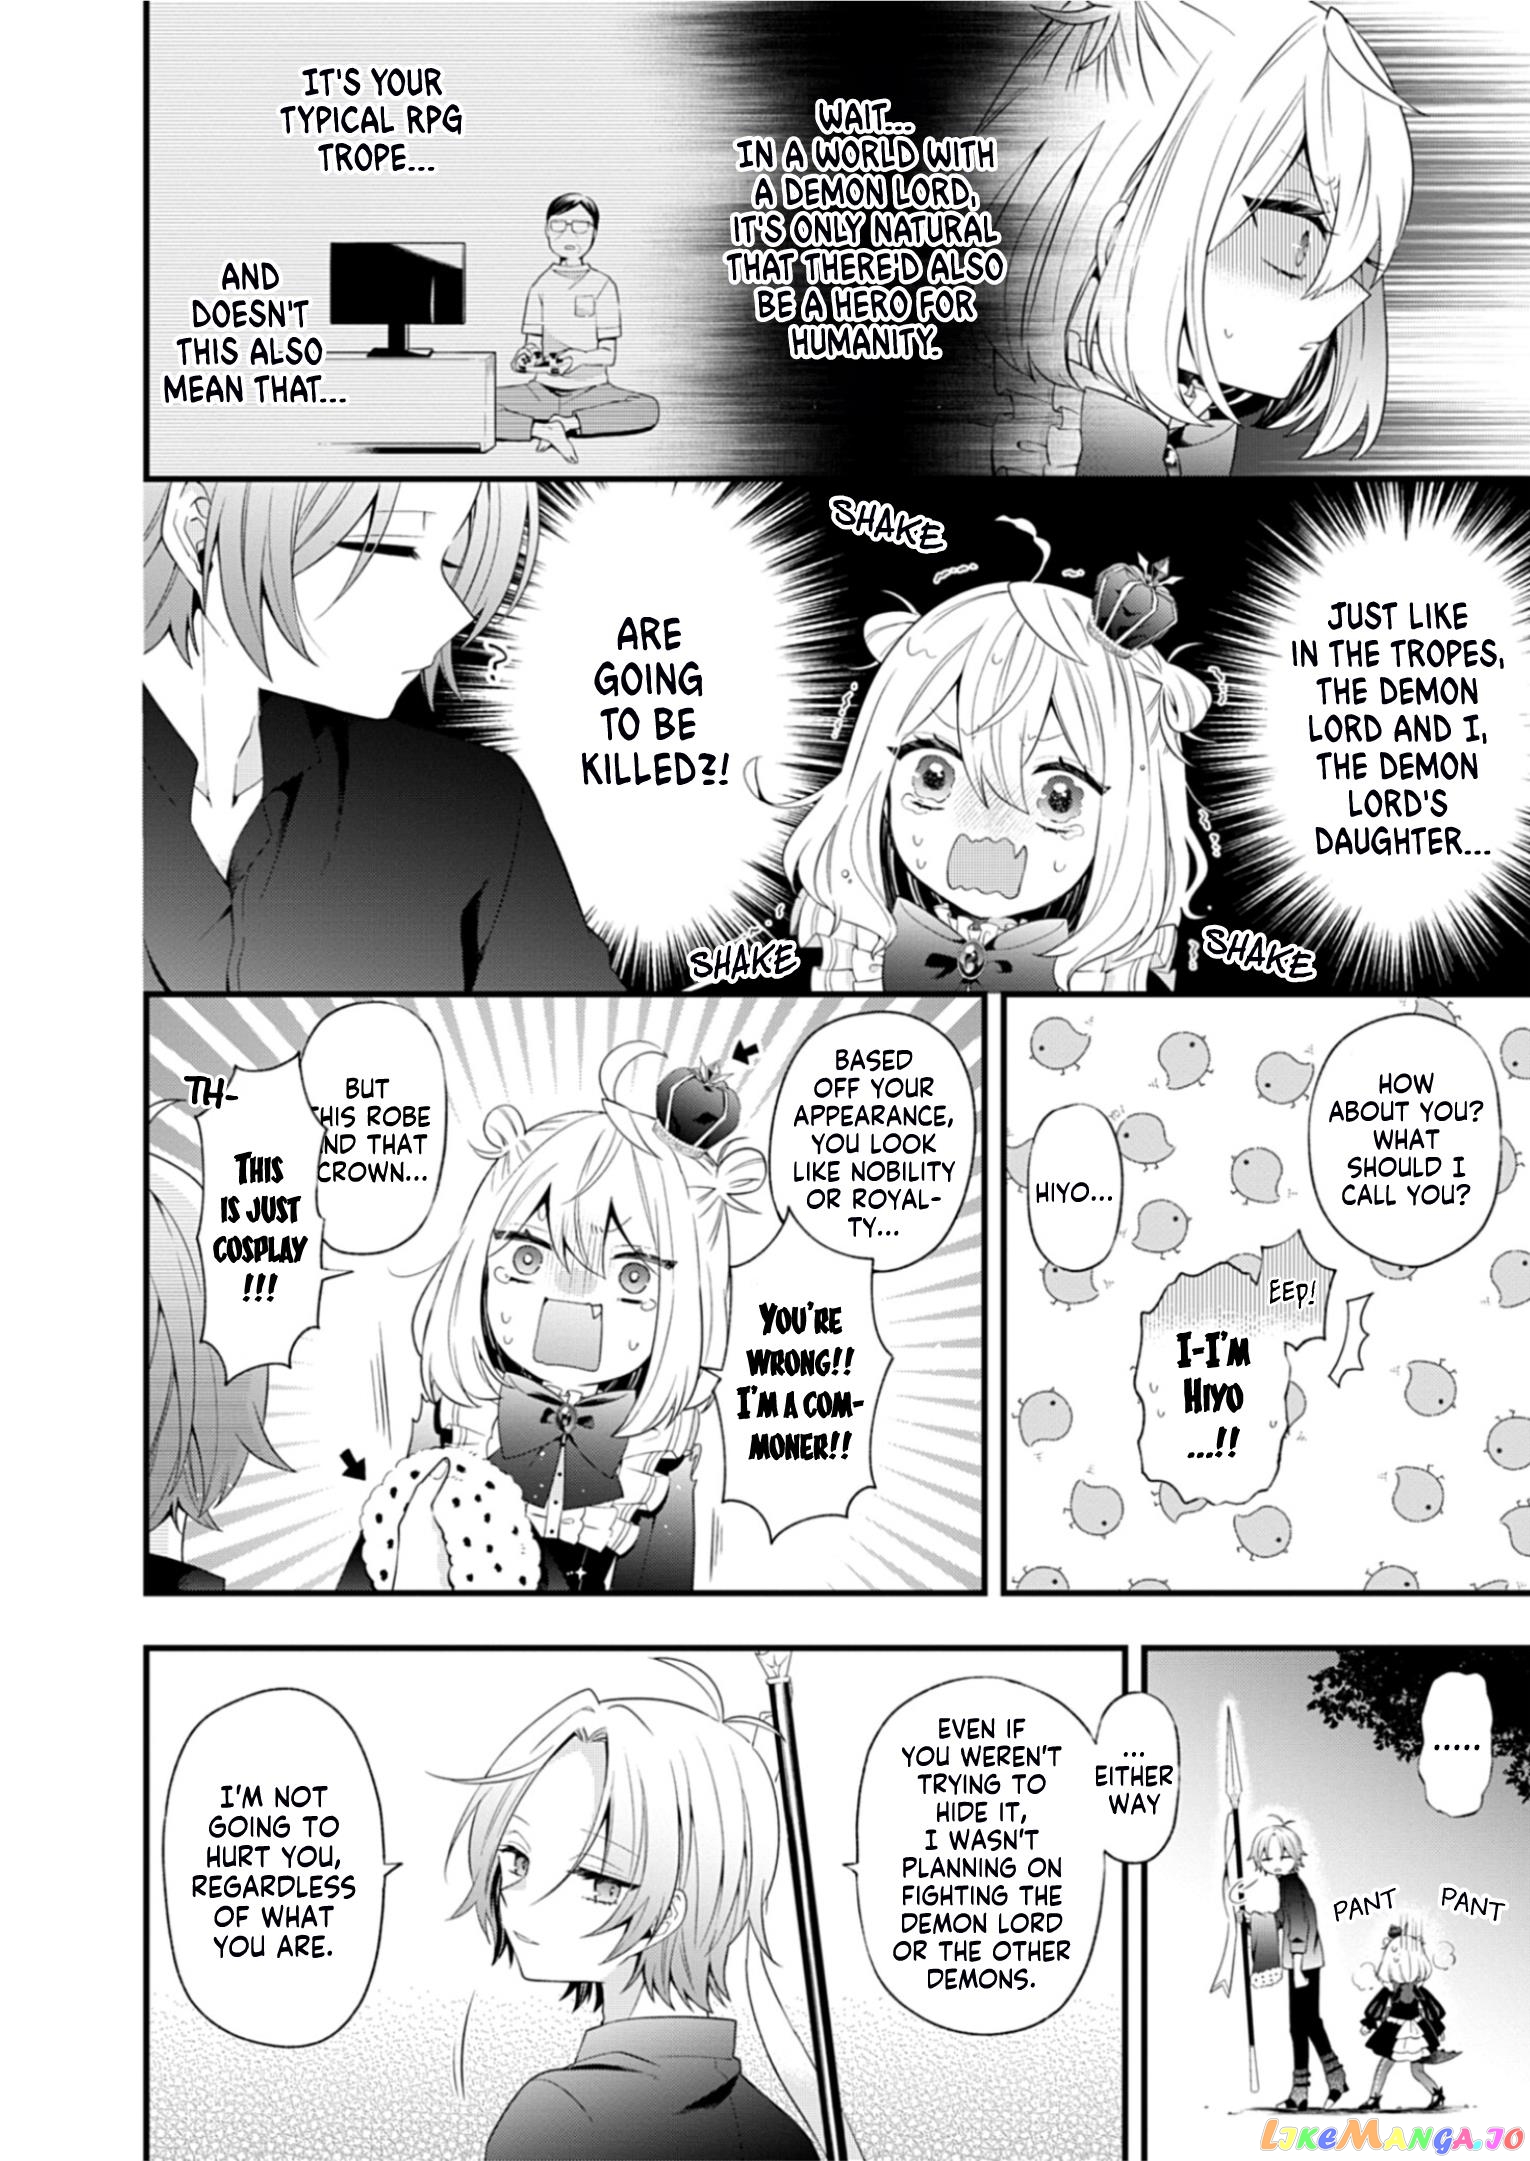 The Old Man That Was Reincarnated as a Young Girl in the Demon World Wants to Become the Demon Lord for the Sake of Peace chapter 2 - page 6